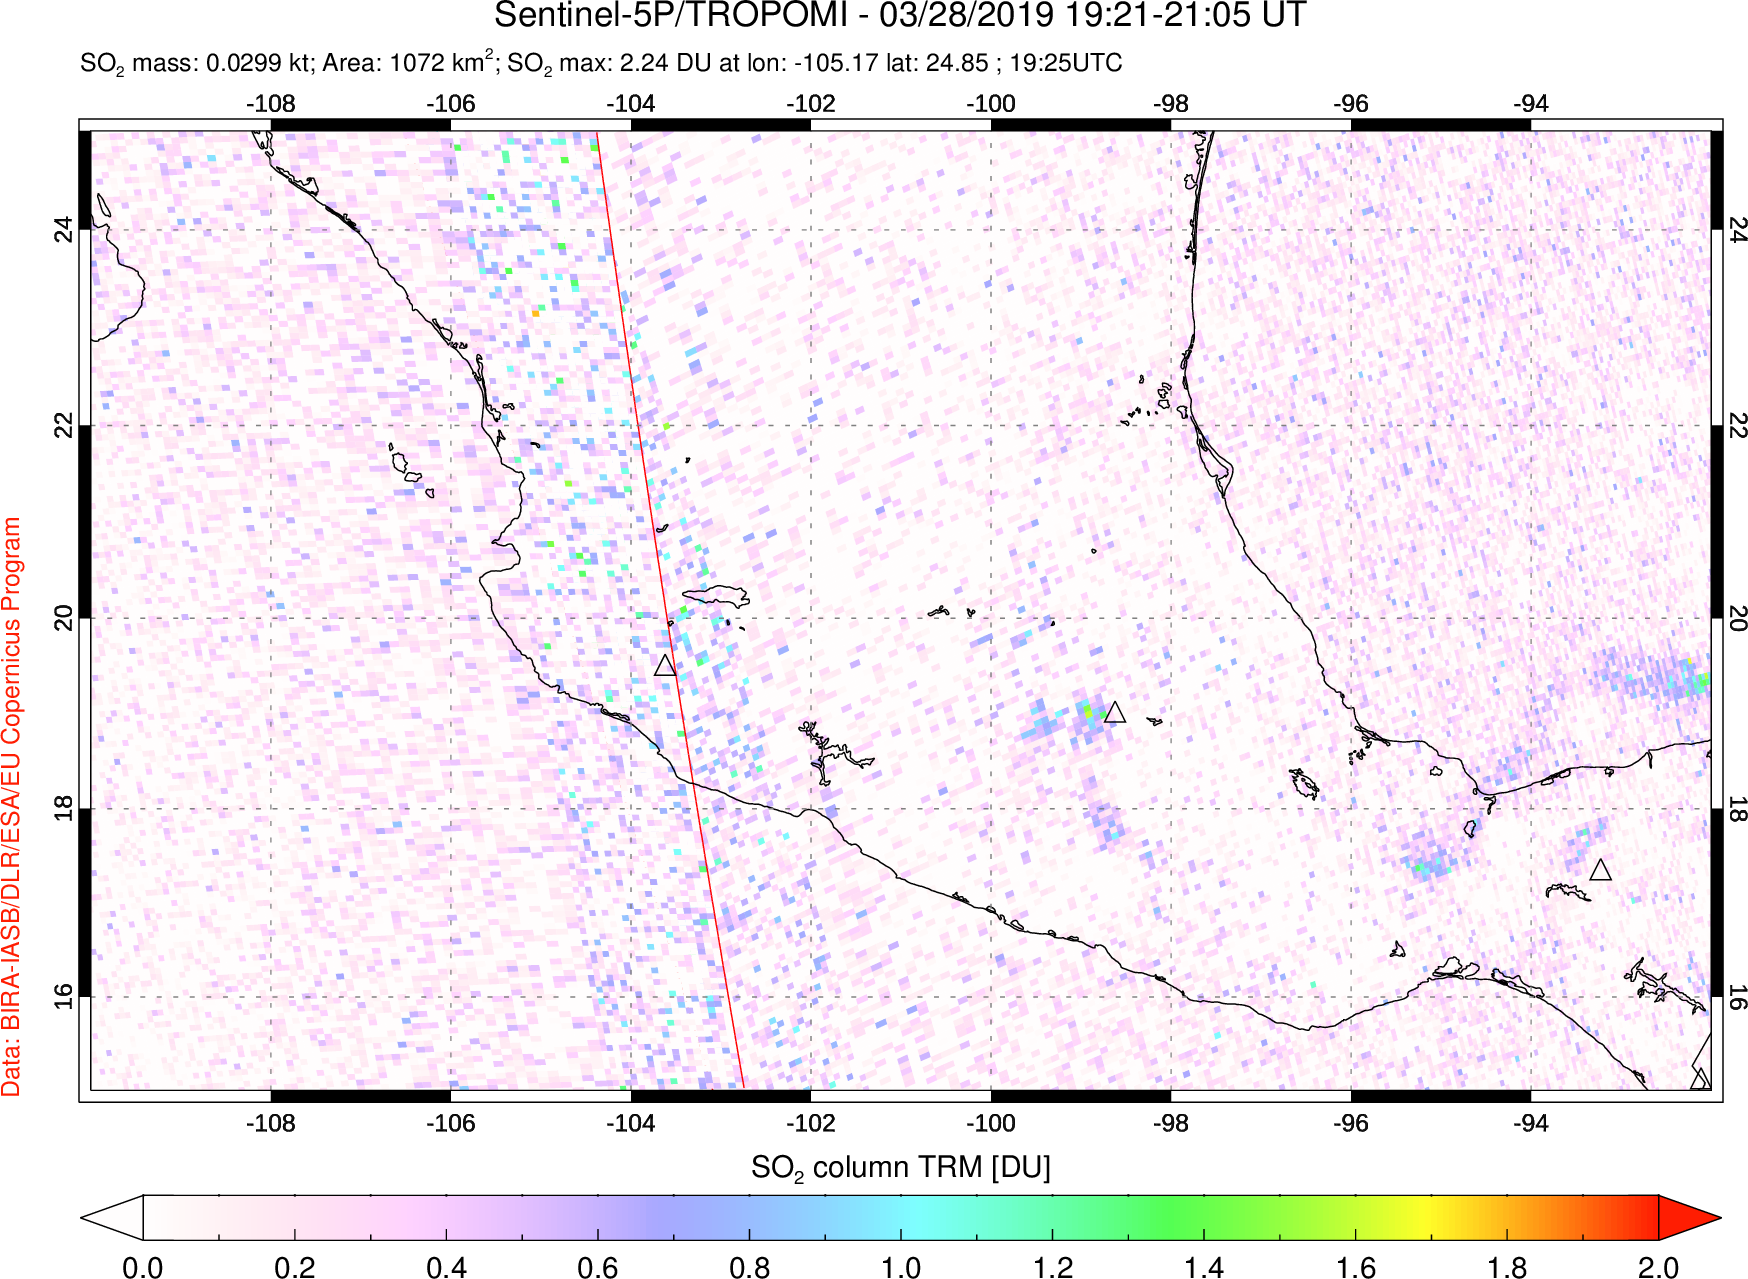 A sulfur dioxide image over Mexico on Mar 28, 2019.